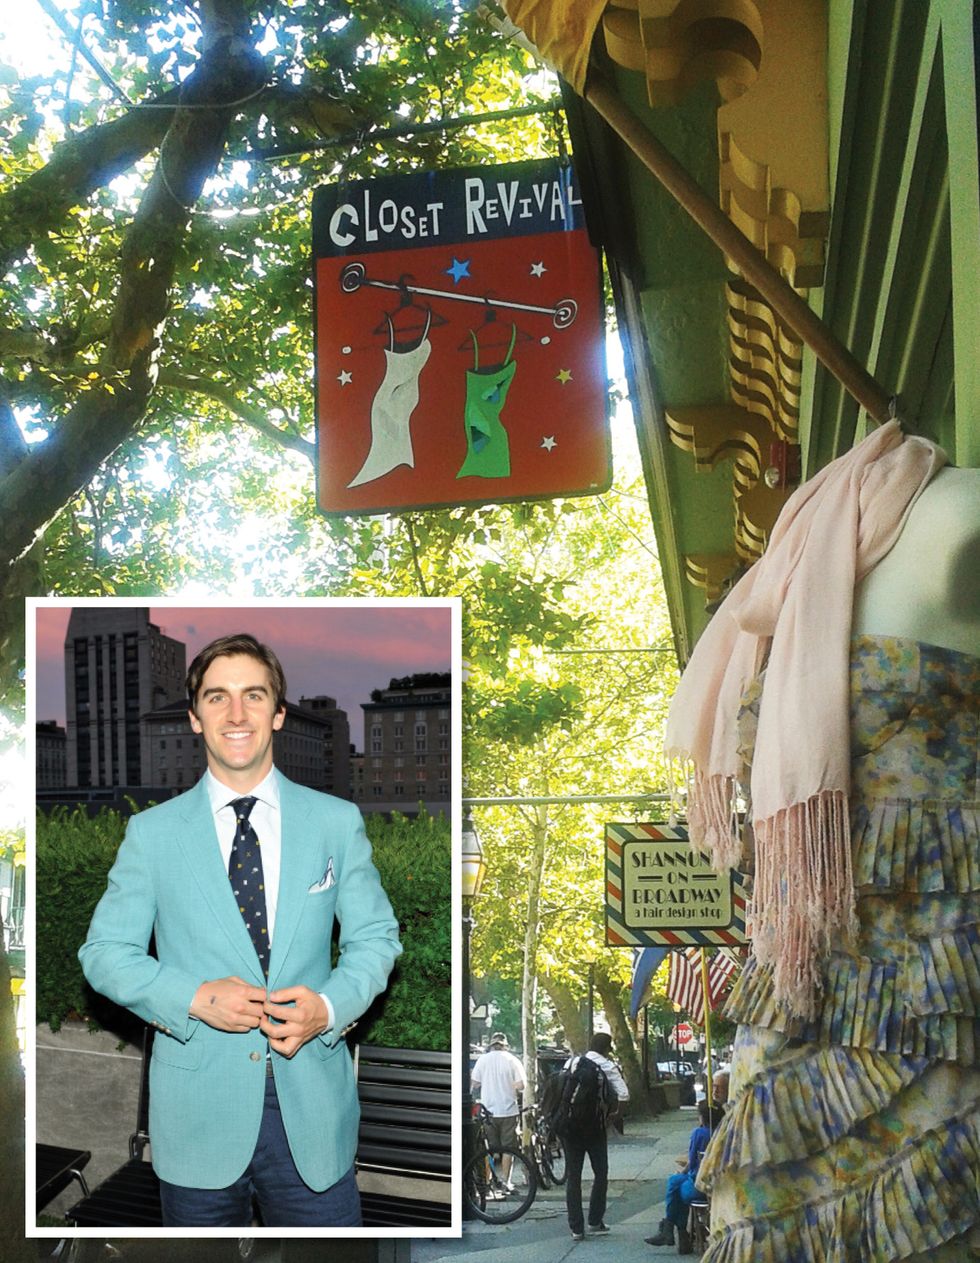 Closet Revival30 BroadwayWhy: This store is great for the same reason The Church Mouse in Palm Beach is one of our favorite vintage shops: the clientele in the community is an excellent resource for inventory. We found this turquoise blazer there for $60.  